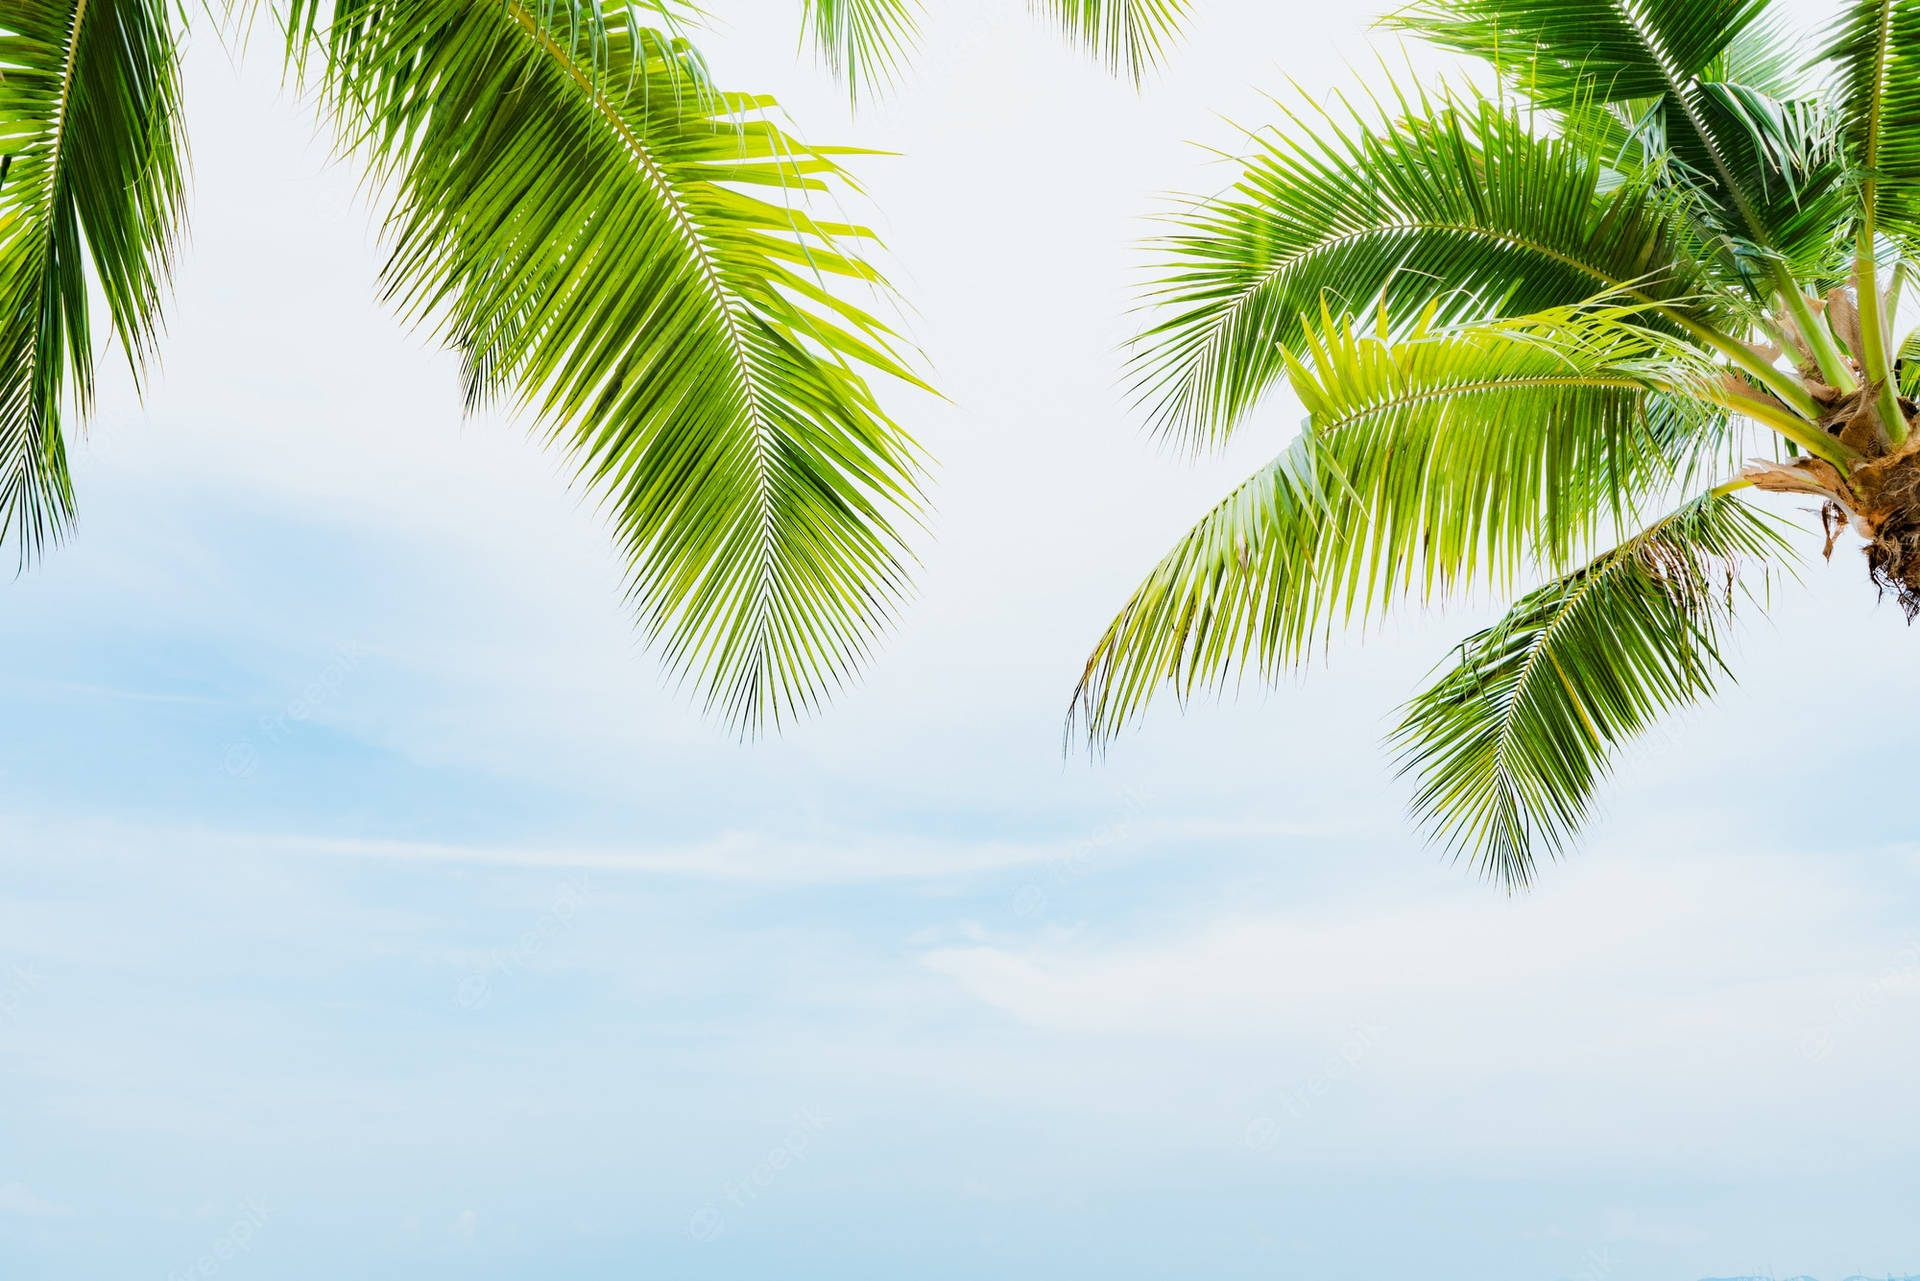 Coconut Trees With Vivid Green Leaves Wallpaper